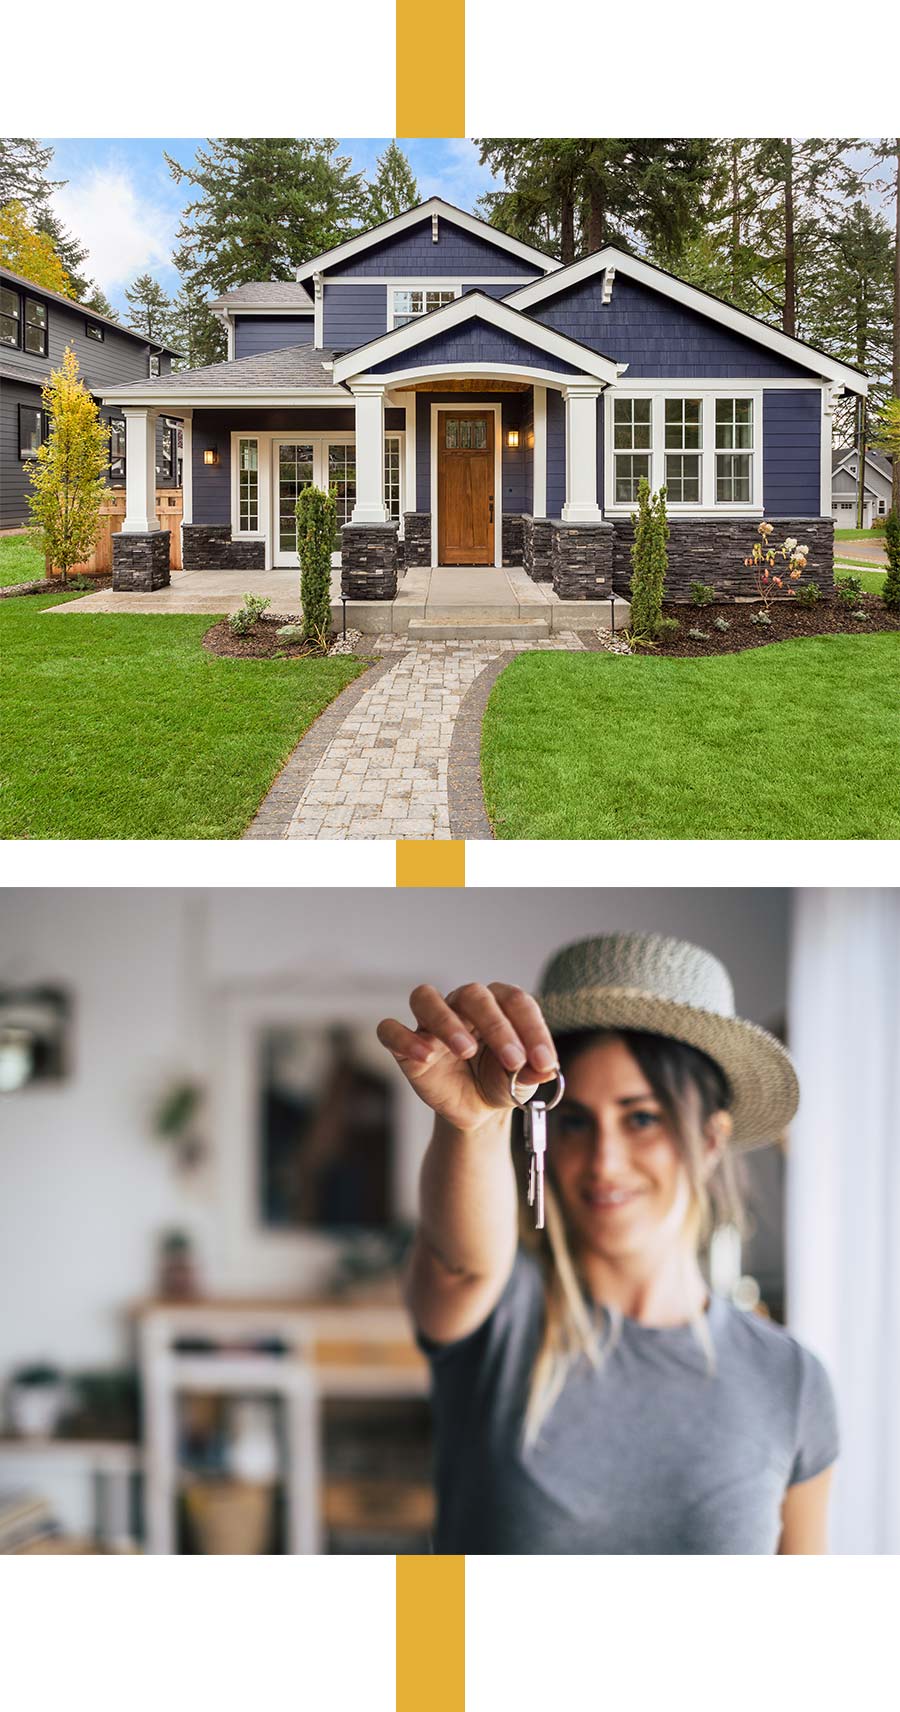 Image mockup of home and home buyers